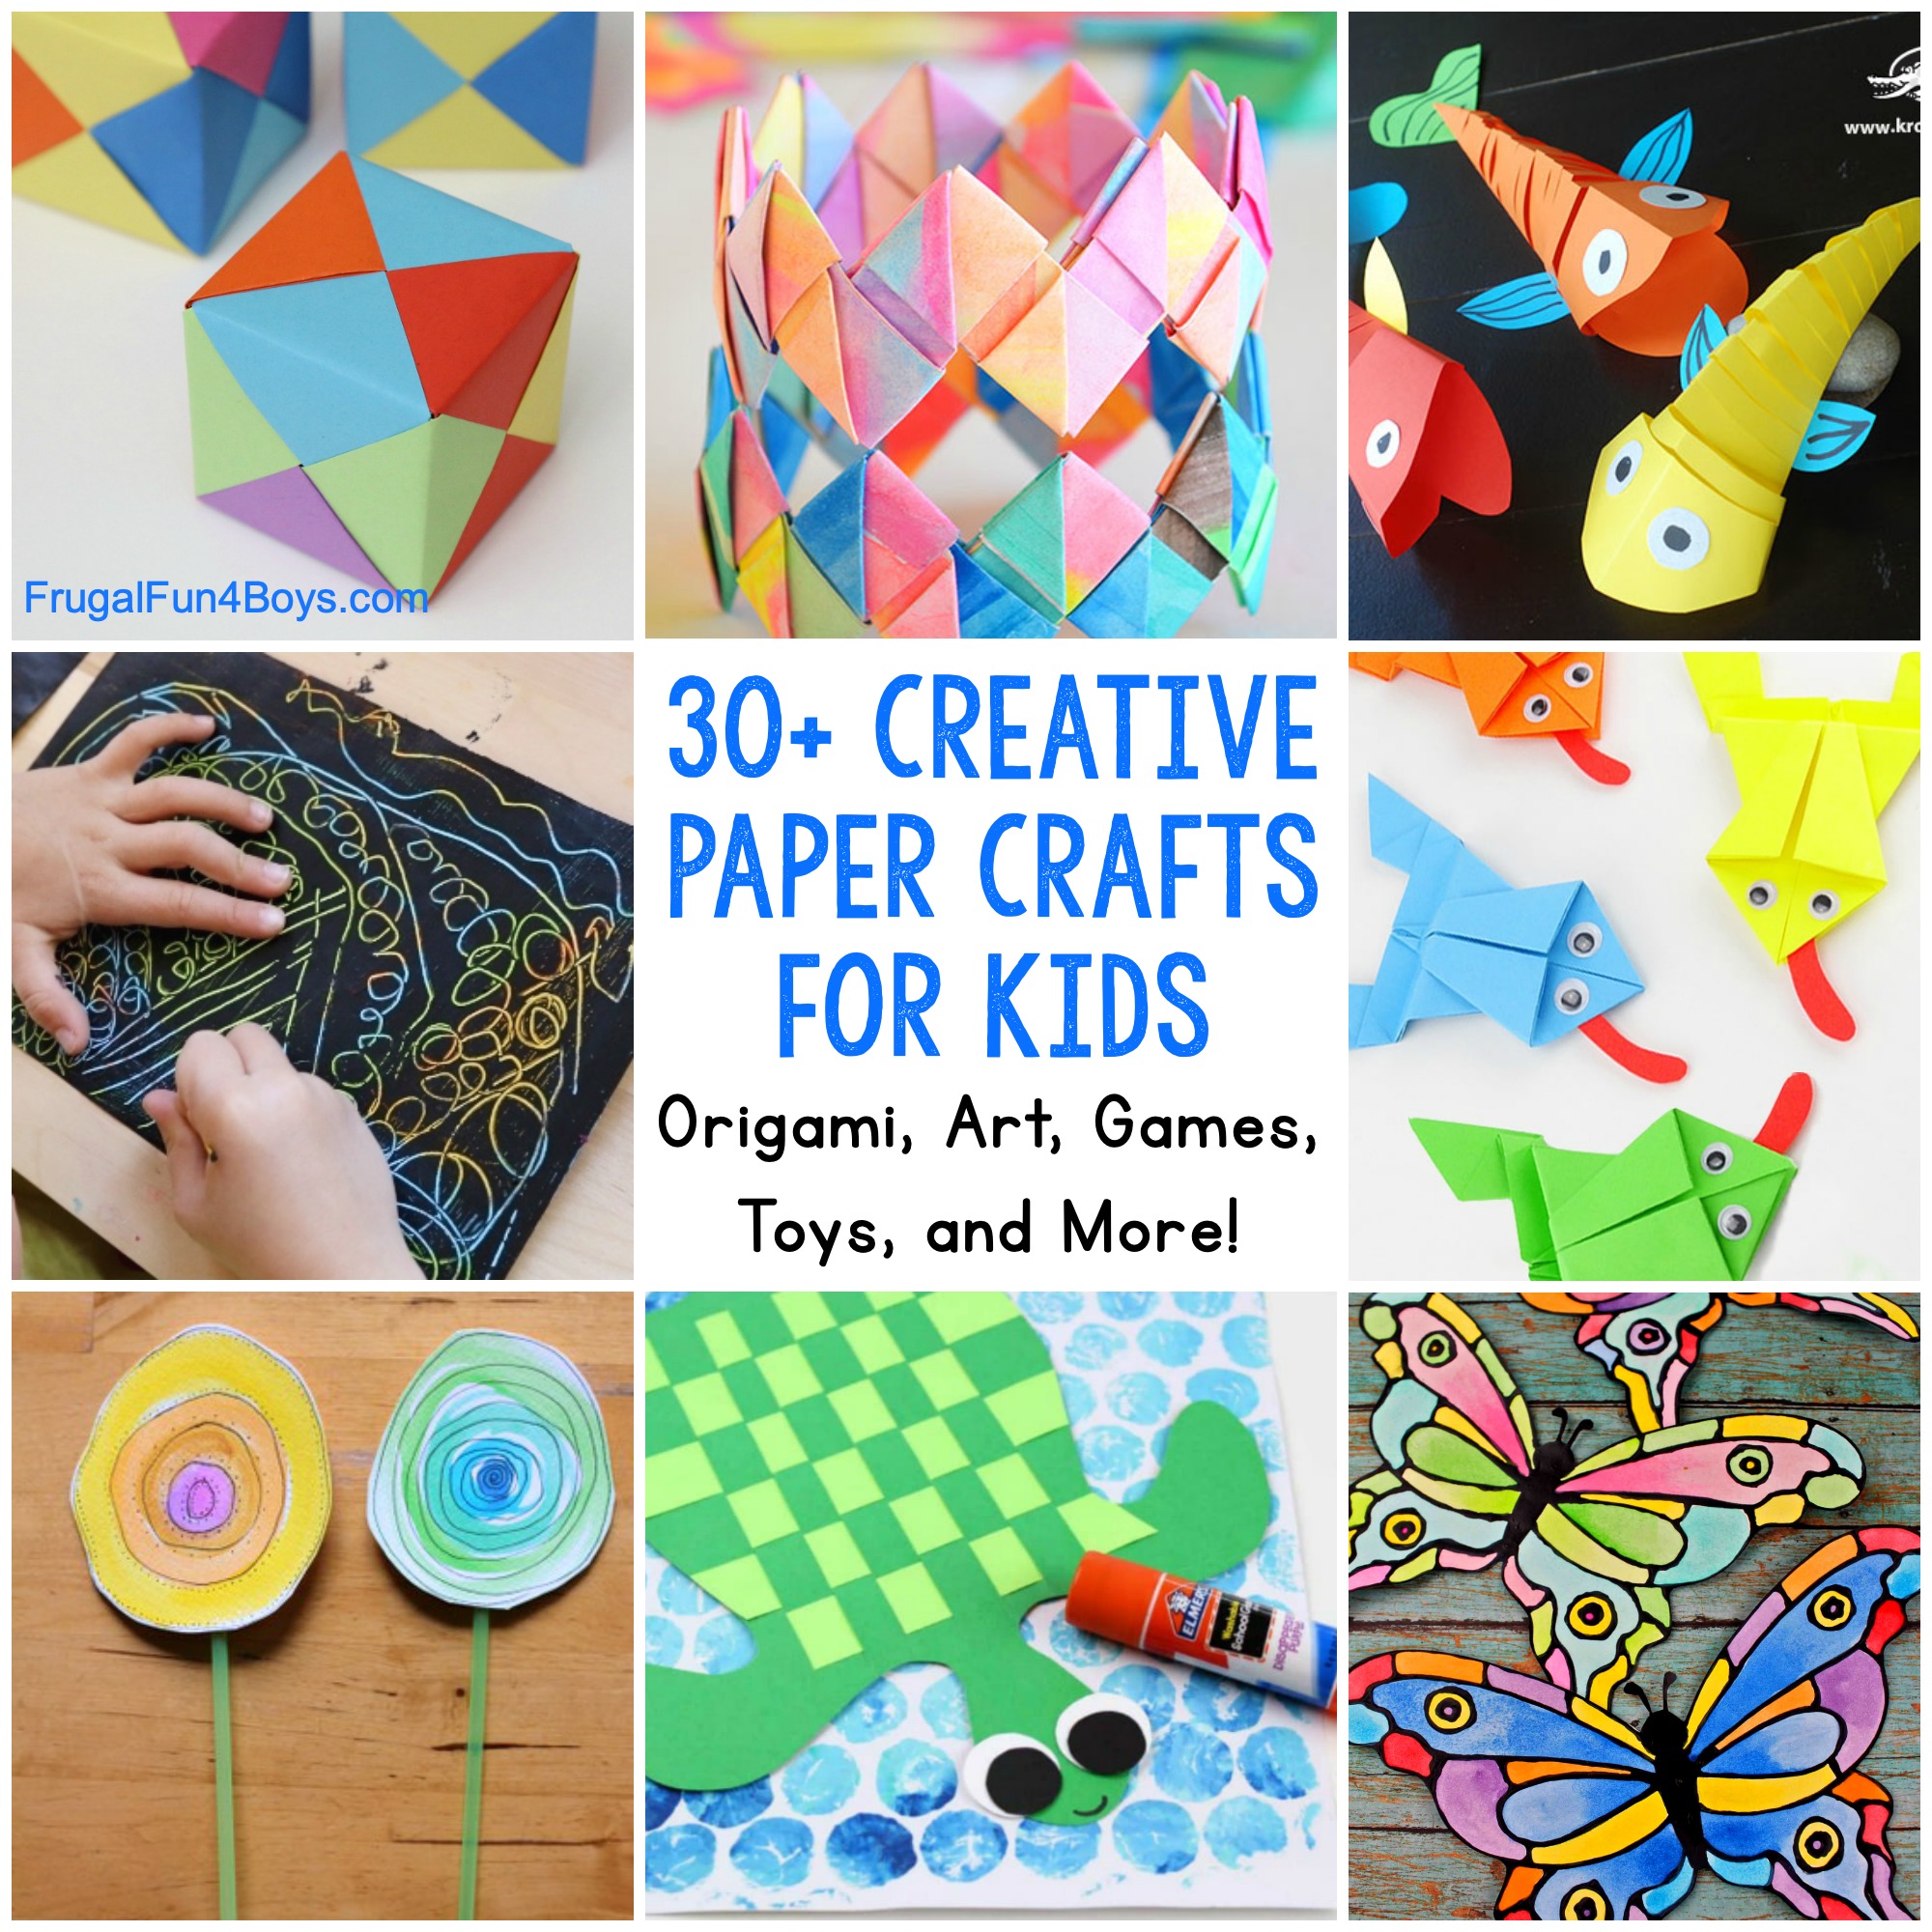 20 Paper Crafts for Kids - that need Only Paper!